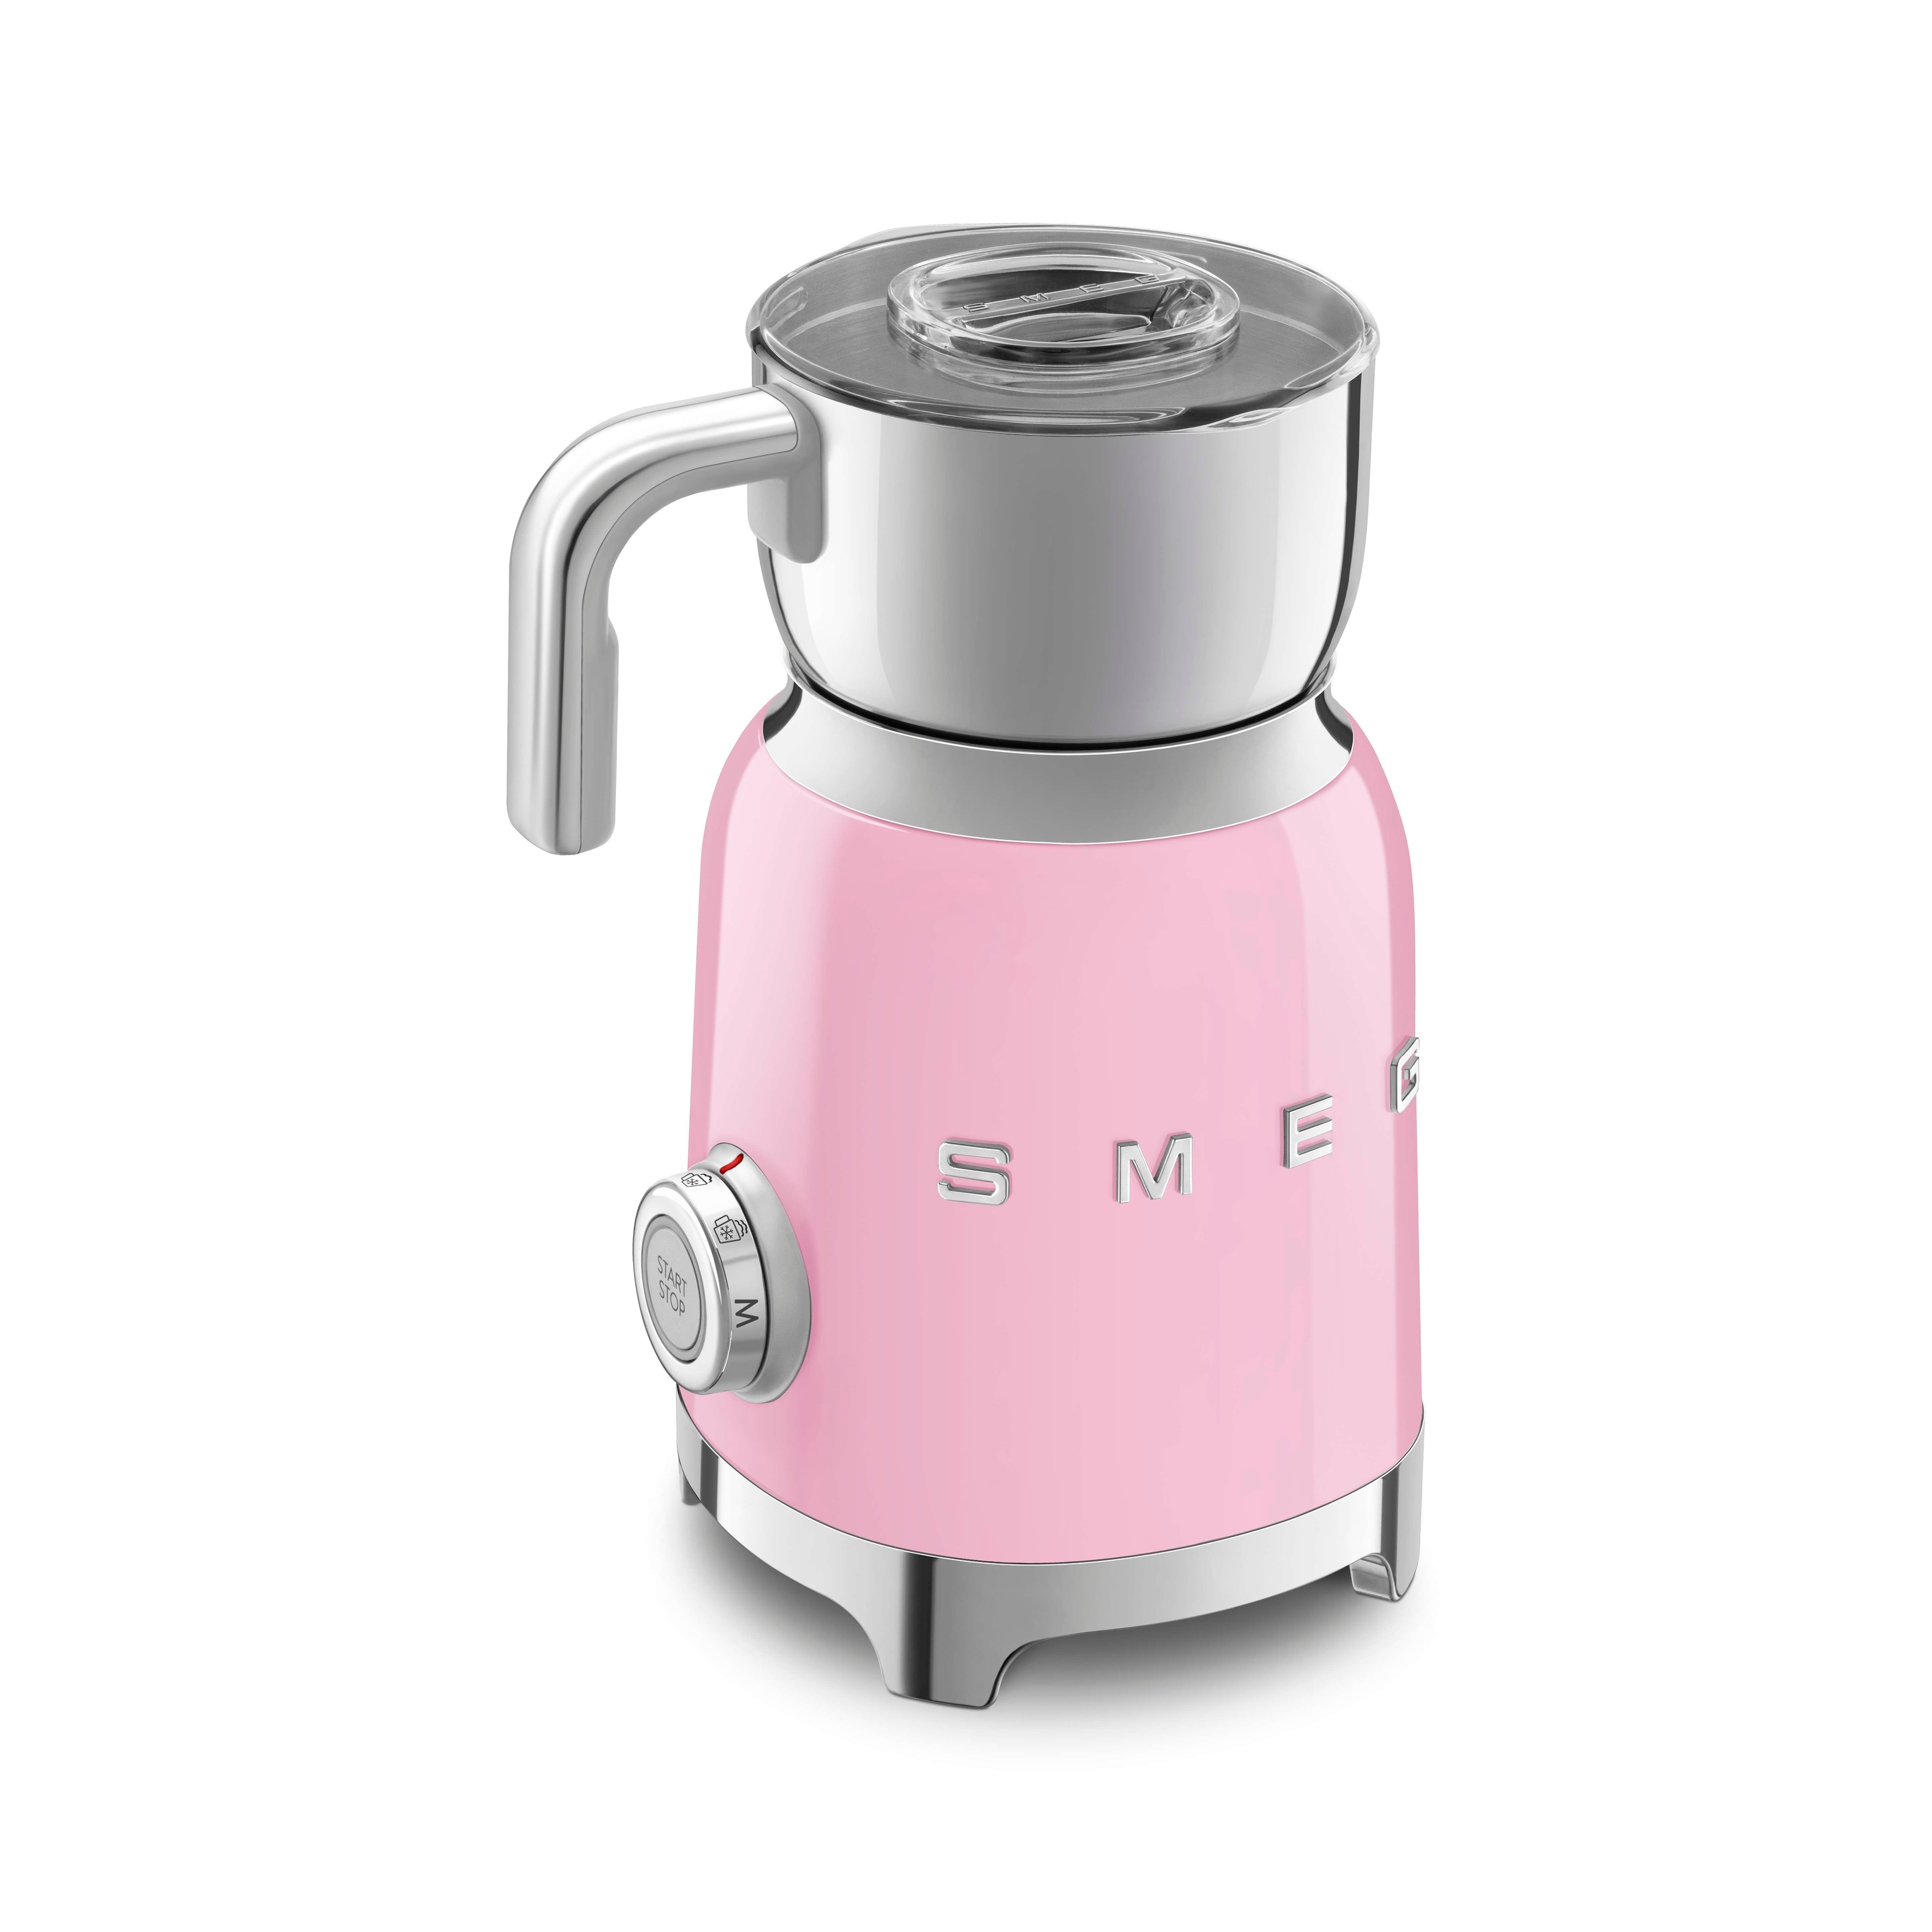 https://ak1.ostkcdn.com/images/products/is/images/direct/d729c145efdca2d7b57e0bb2ad61d9a7e992a943/SMEG-Milk-Frother-MFF11.jpg